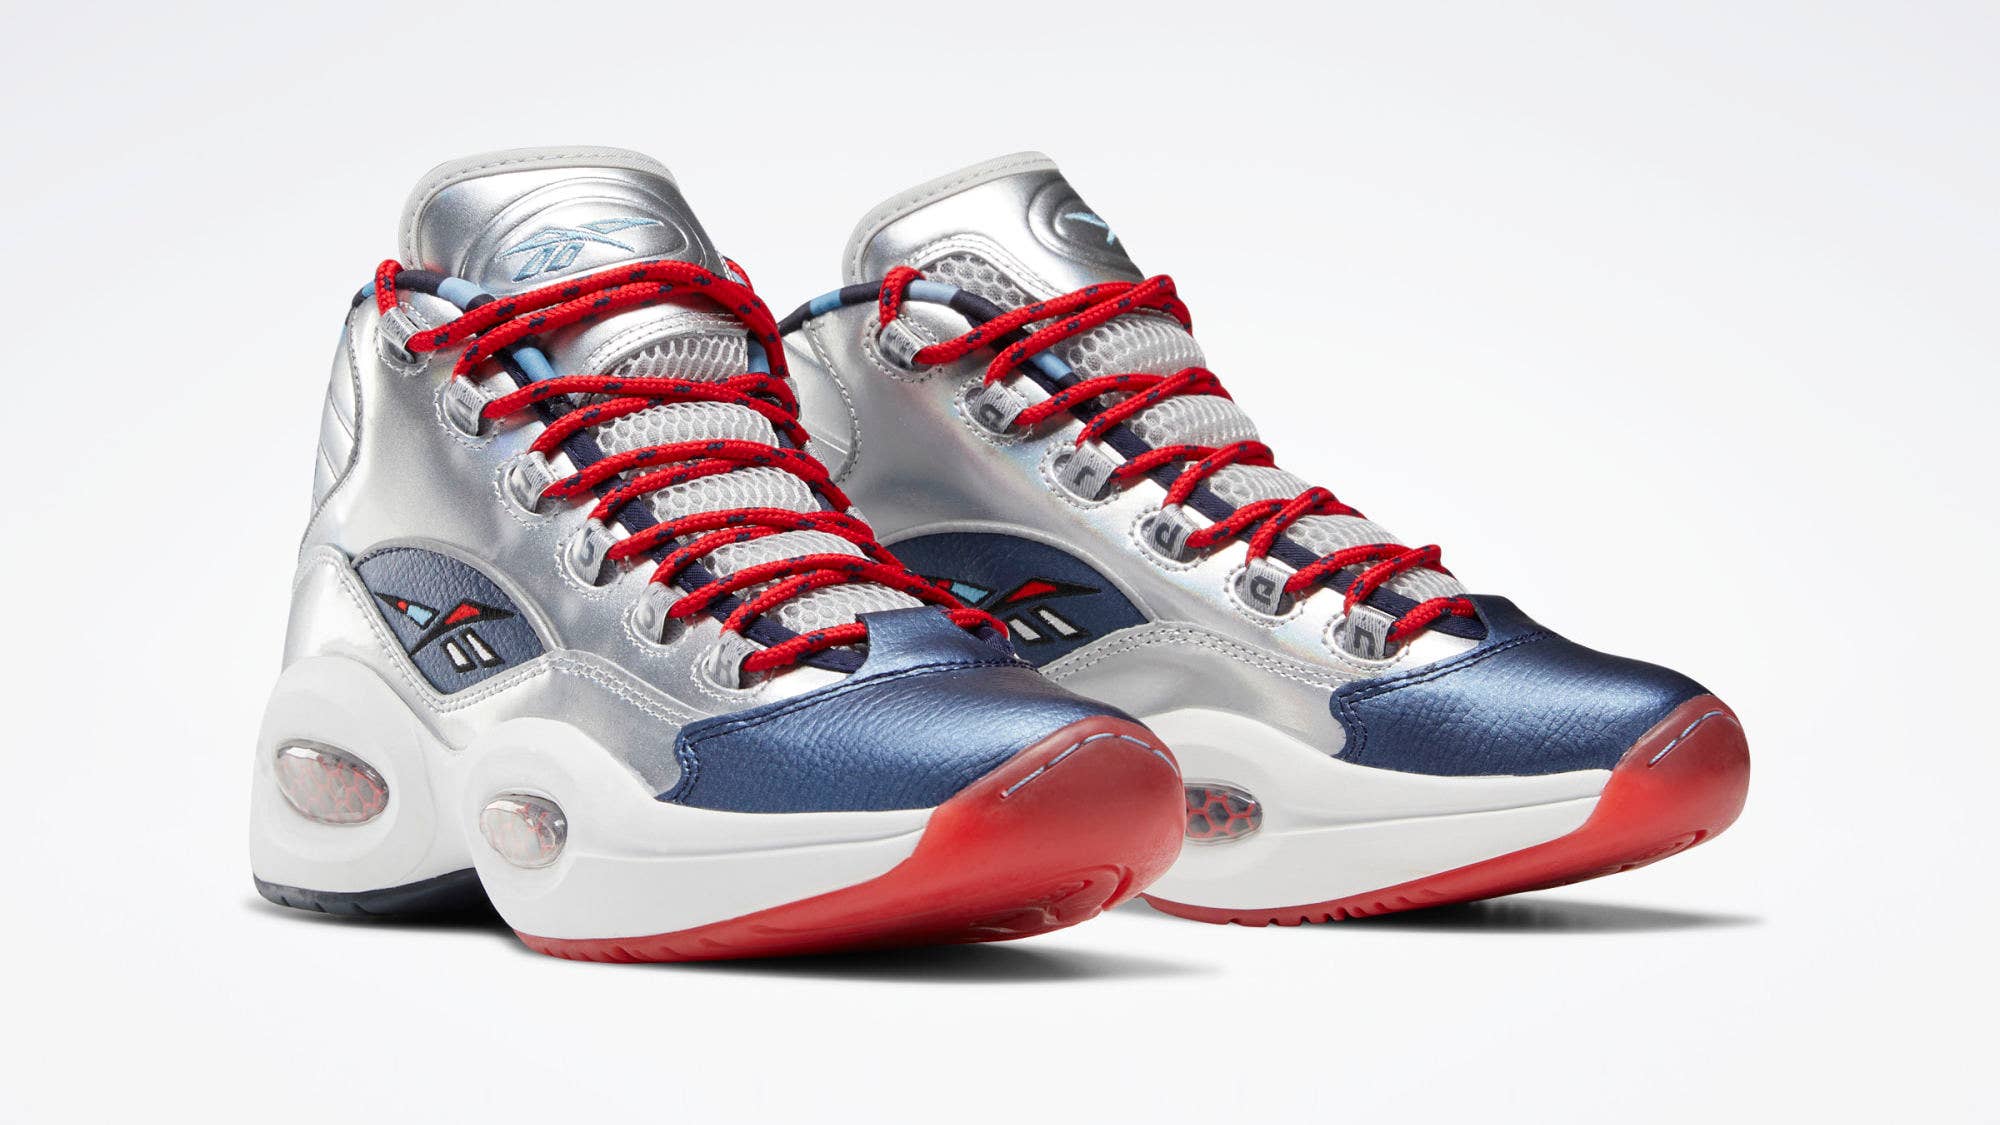 Reebok Links Up With adidas On The Reebok Question Mid Iverson x